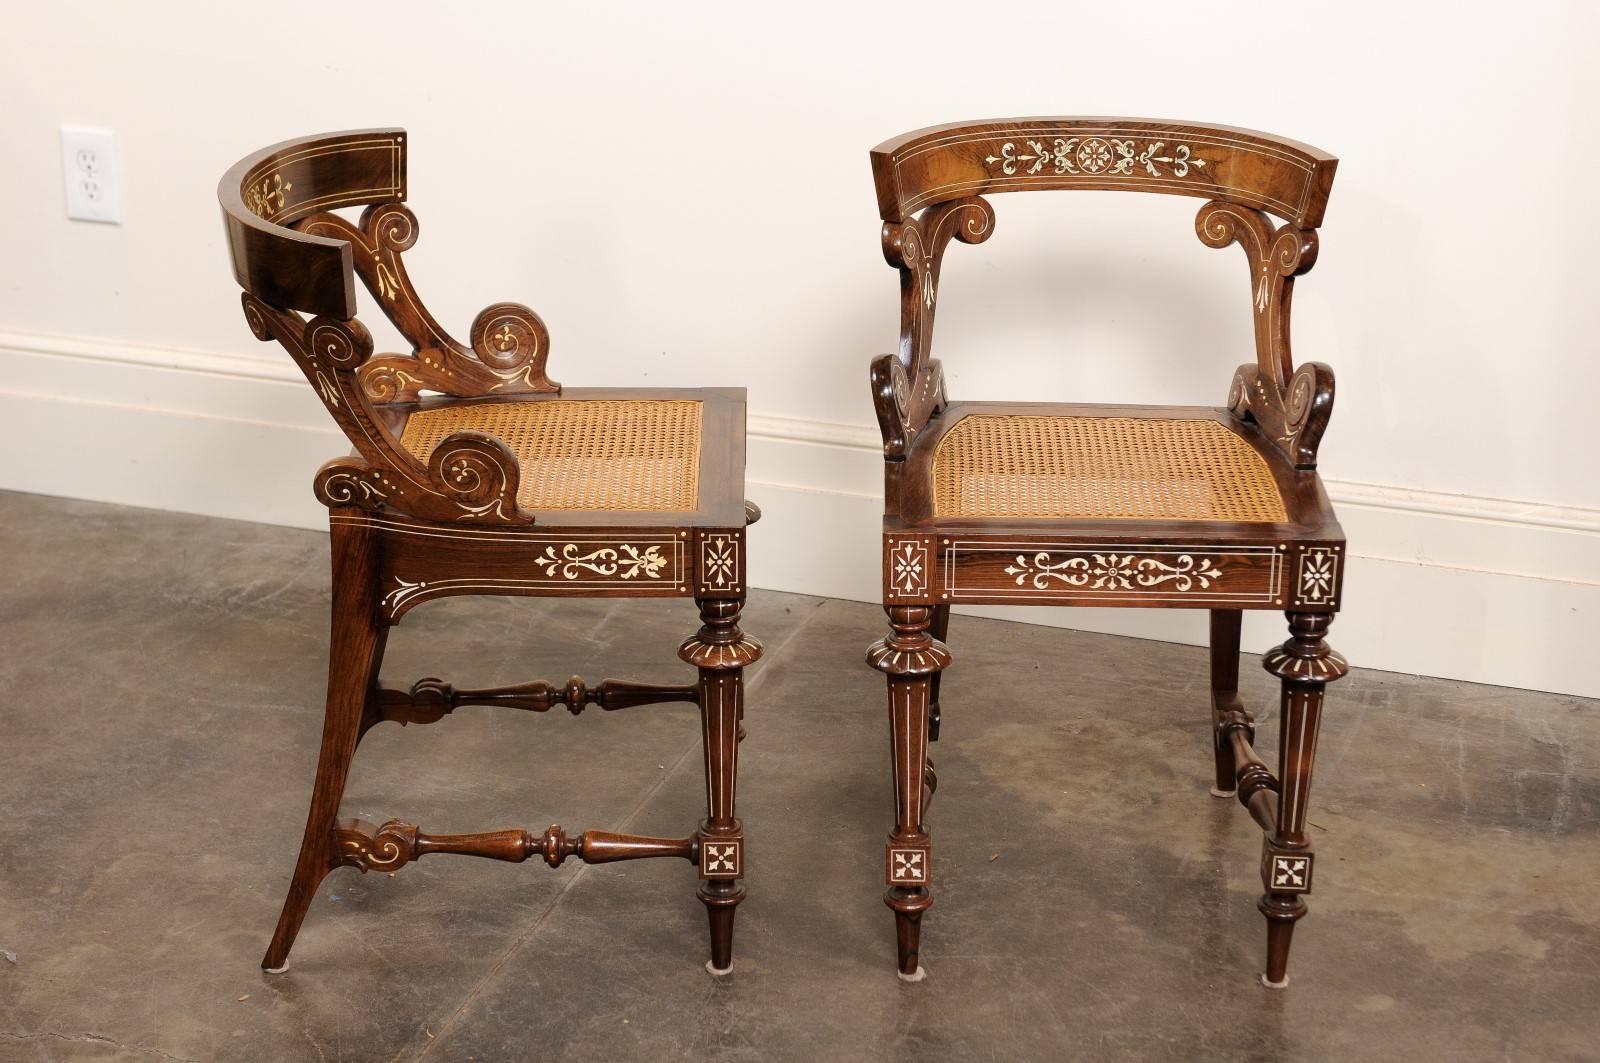 Indian Pair of Barrel Back Wooden Slipper Chairs with Marquetry Décor and Cane Seats